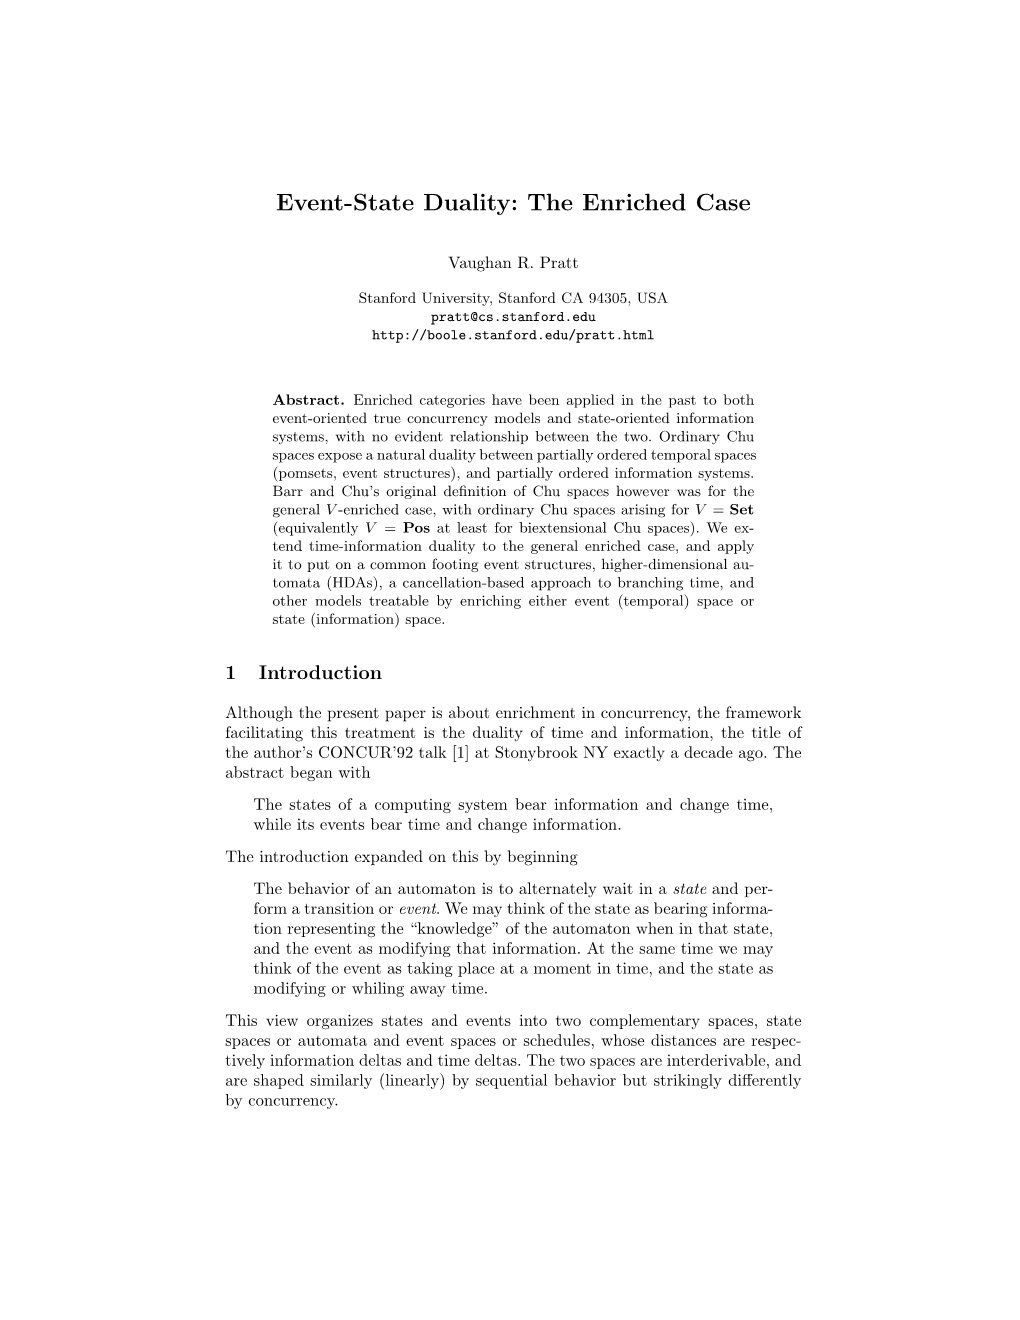 Event-State Duality: the Enriched Case